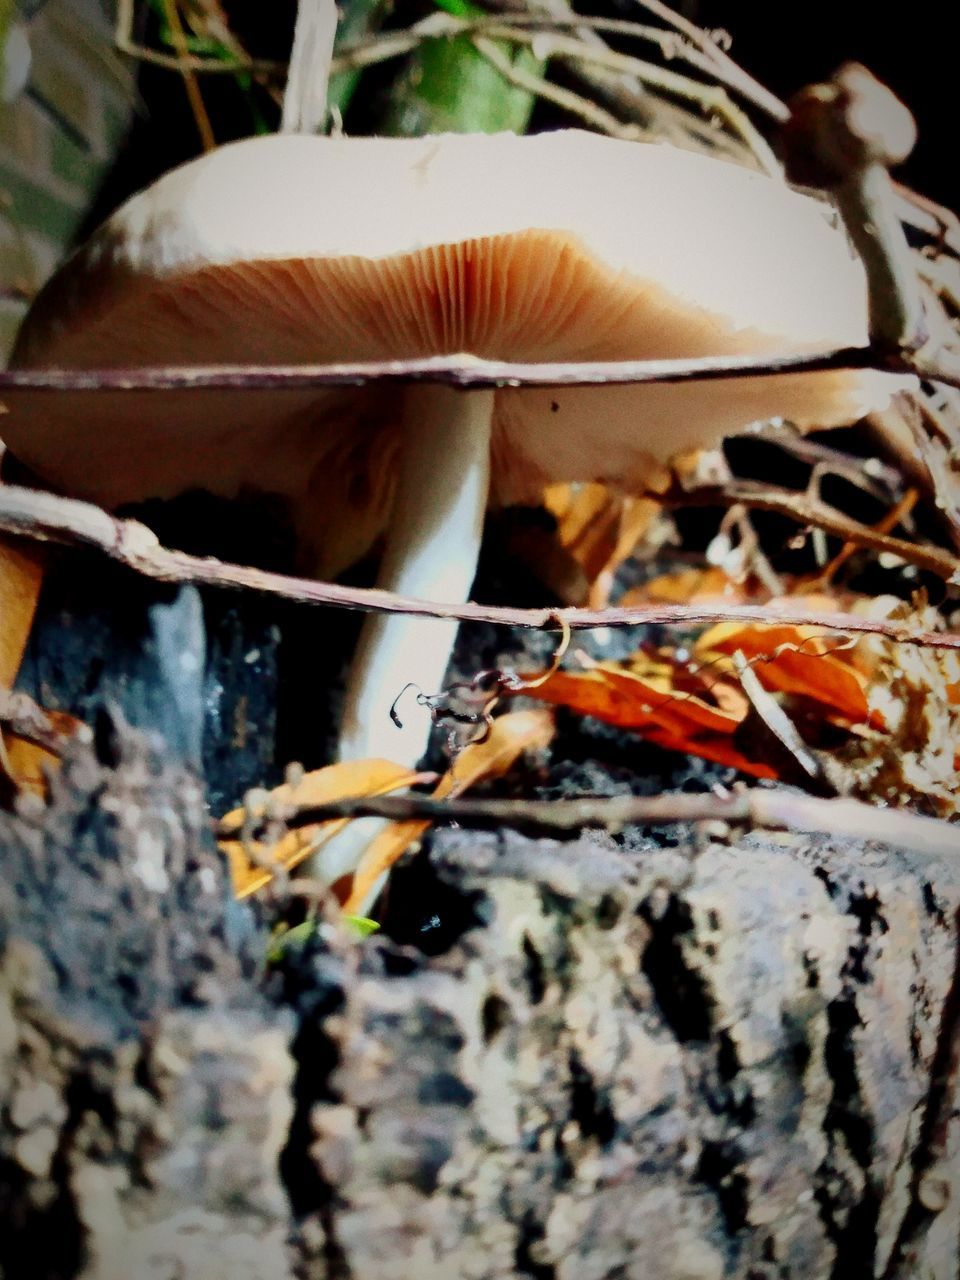 fungus, mushroom, vegetable, food, plant, growth, nature, close-up, tree, toadstool, no people, autumn, food and drink, edible mushroom, macro photography, land, forest, day, leaf, focus on foreground, outdoors, fragility, beauty in nature, freshness, oyster mushroom, selective focus